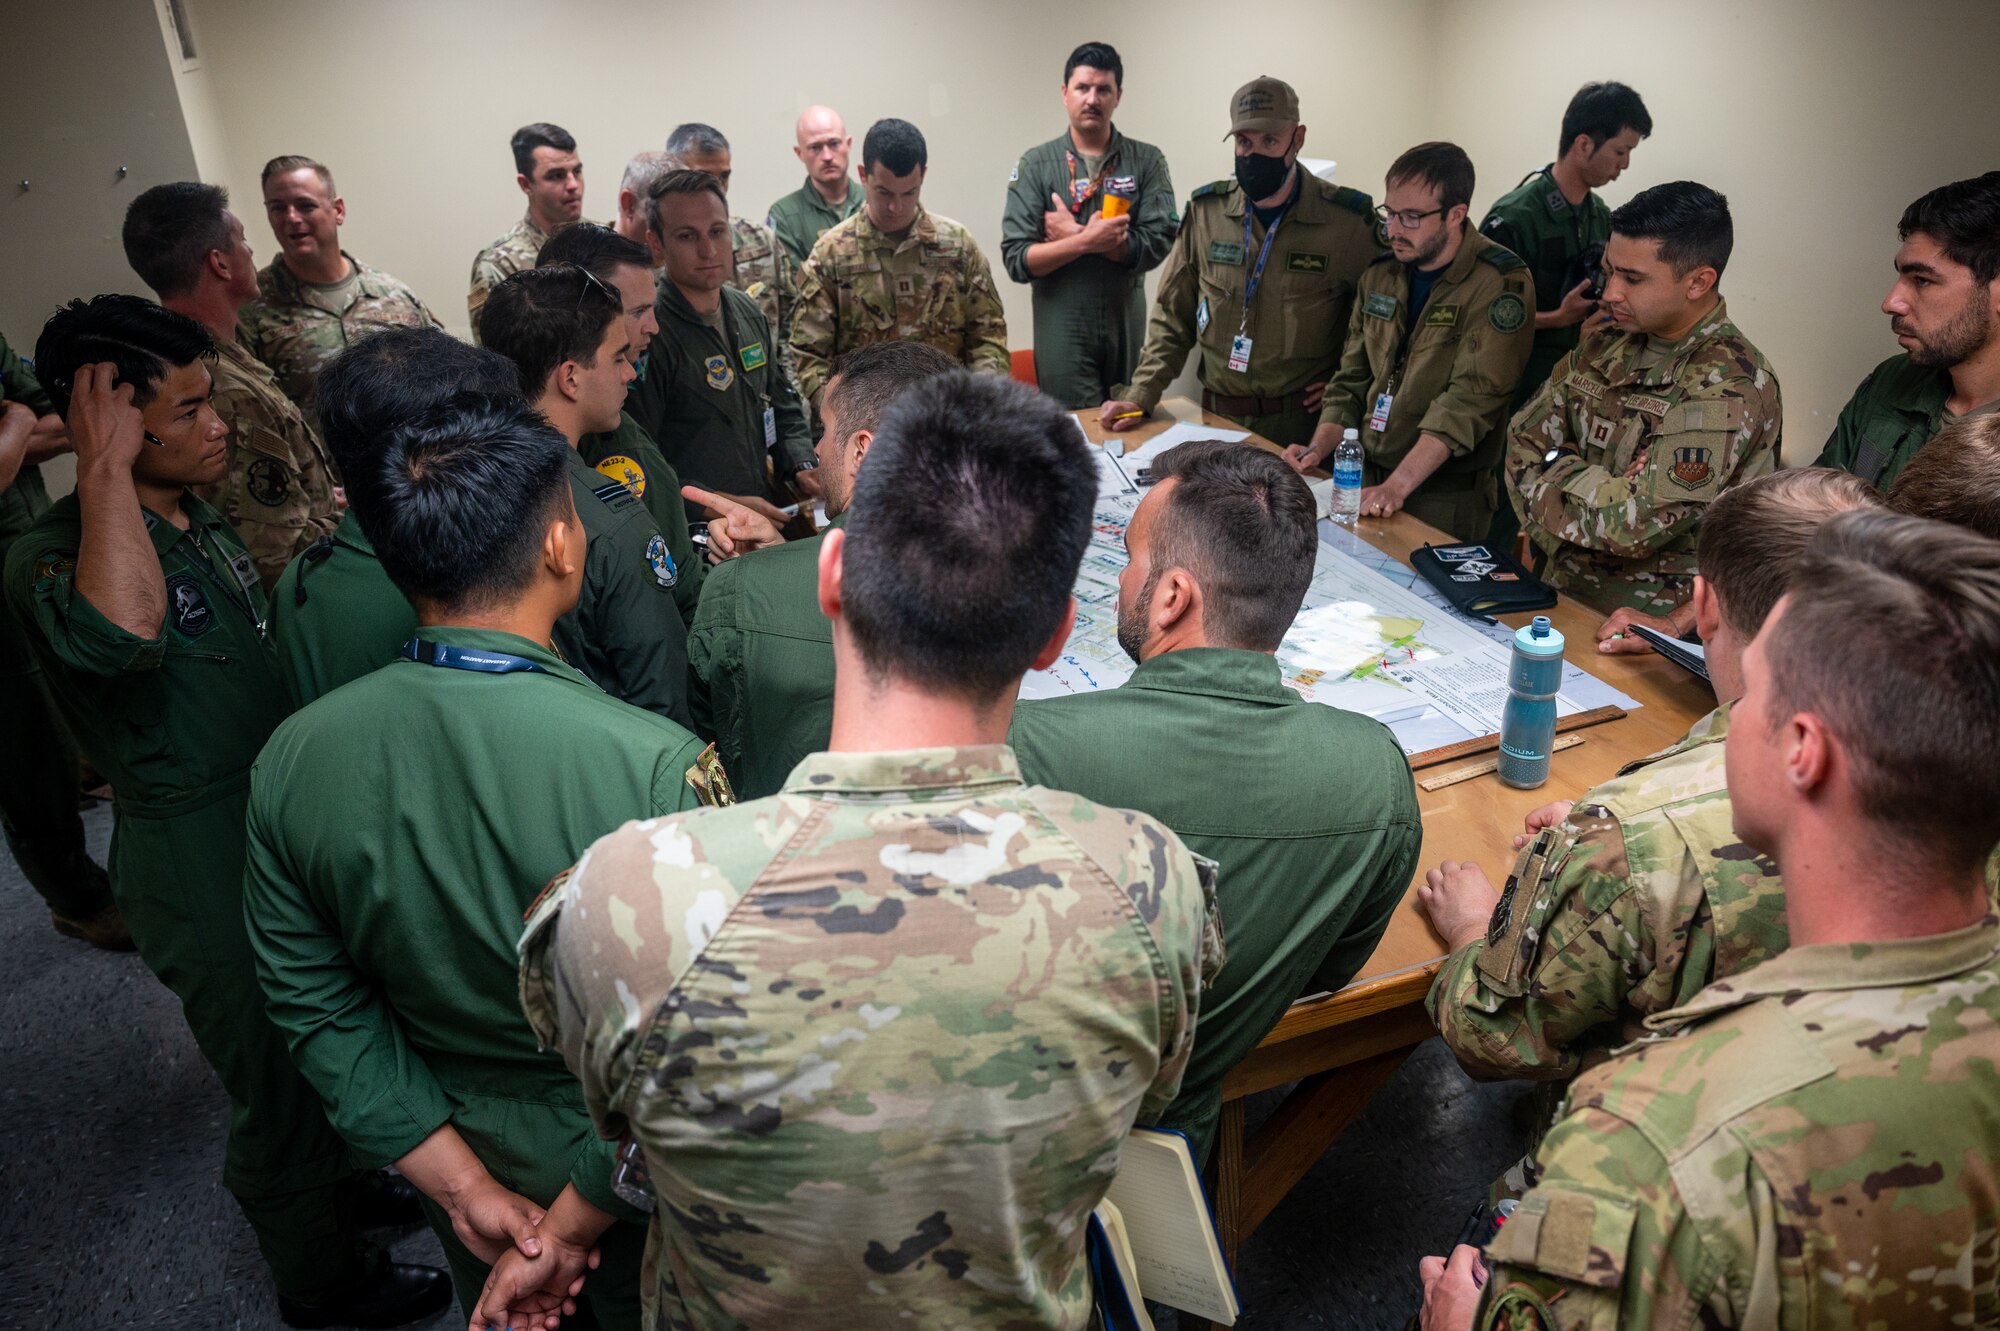 Members from multiple nations air forces gather together to plan an elephant walk during Mobility Guardian 23 in Andersen Air Force Base, Guam, July 18, 2023. MG23 is an opportunity to train alongside our Allies and partners to demonstrate interoperability and bolster our collective ability to support a free and open Indo-Pacific. (U.S. Air Force photo by Tech. Sgt. Sean Carnes)